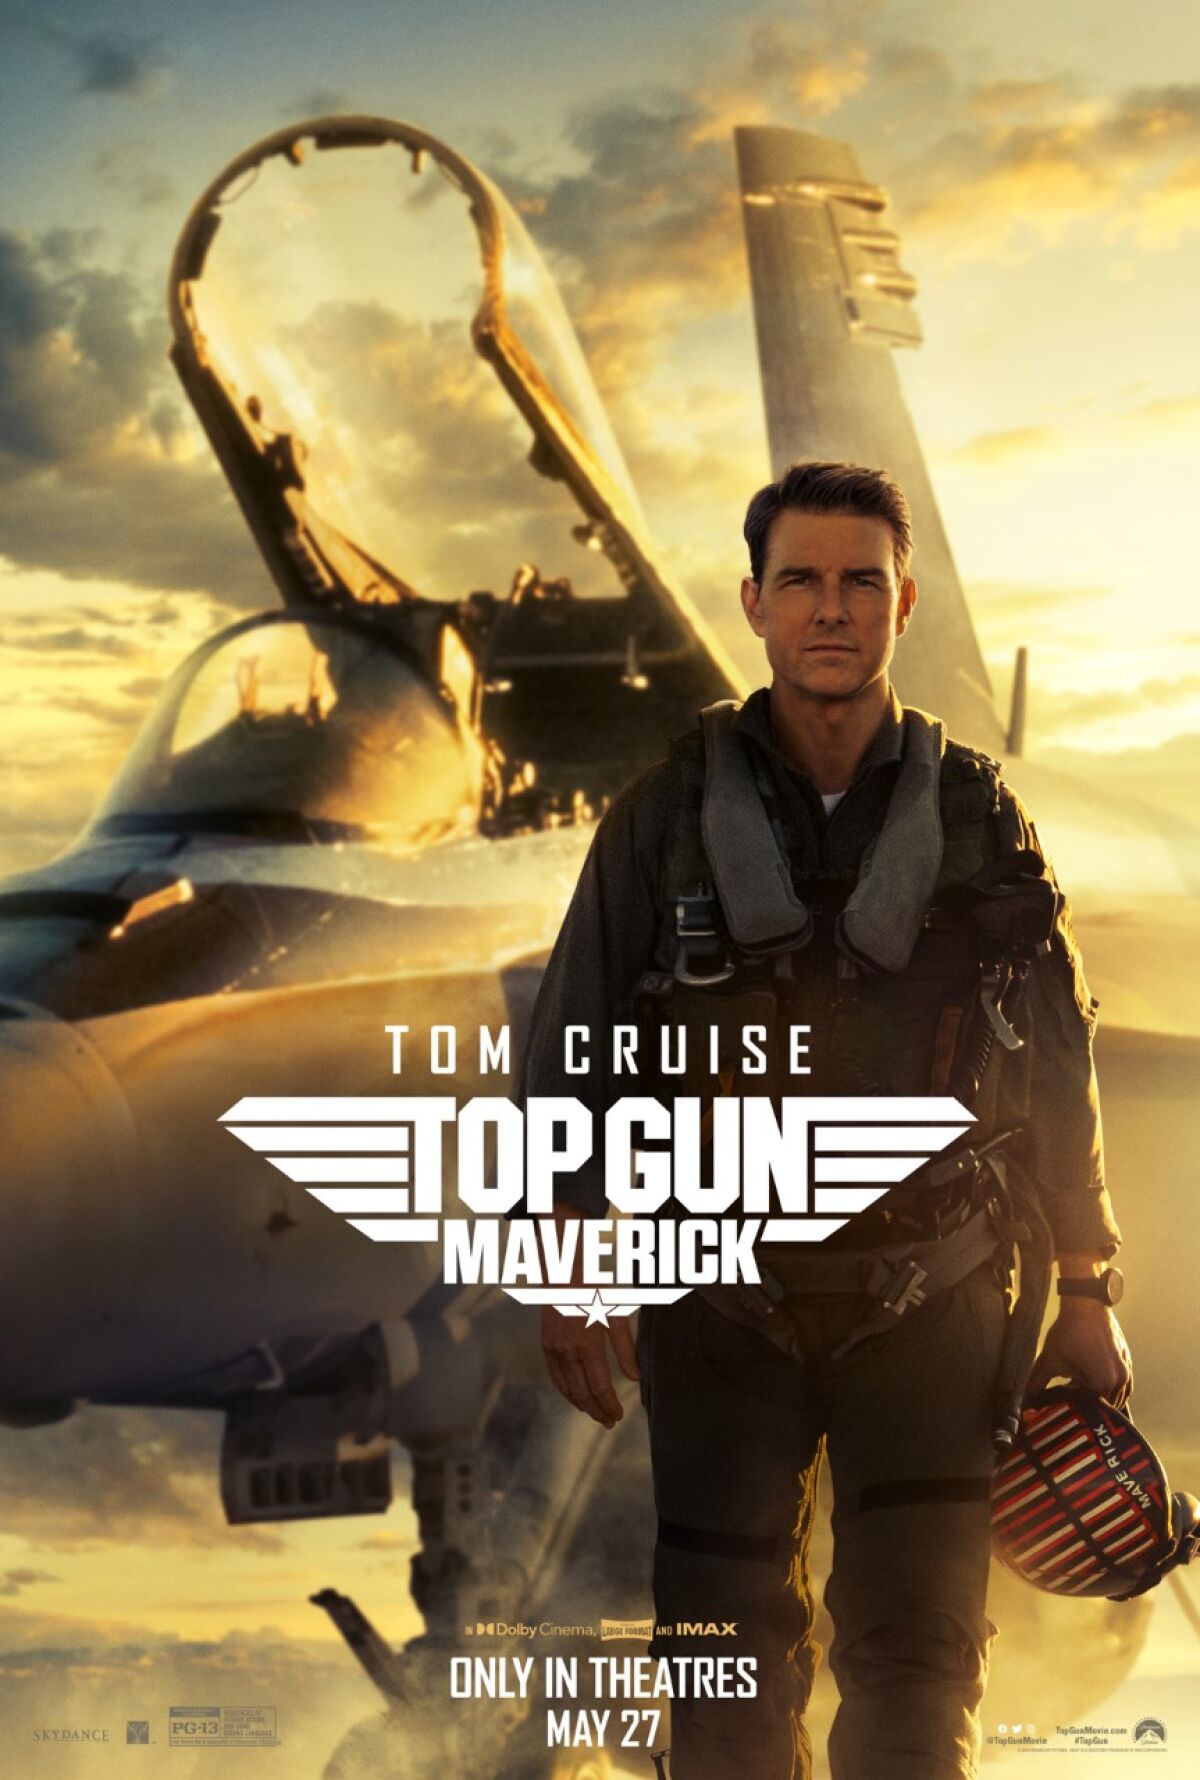 Movie poster with Tom Cruise